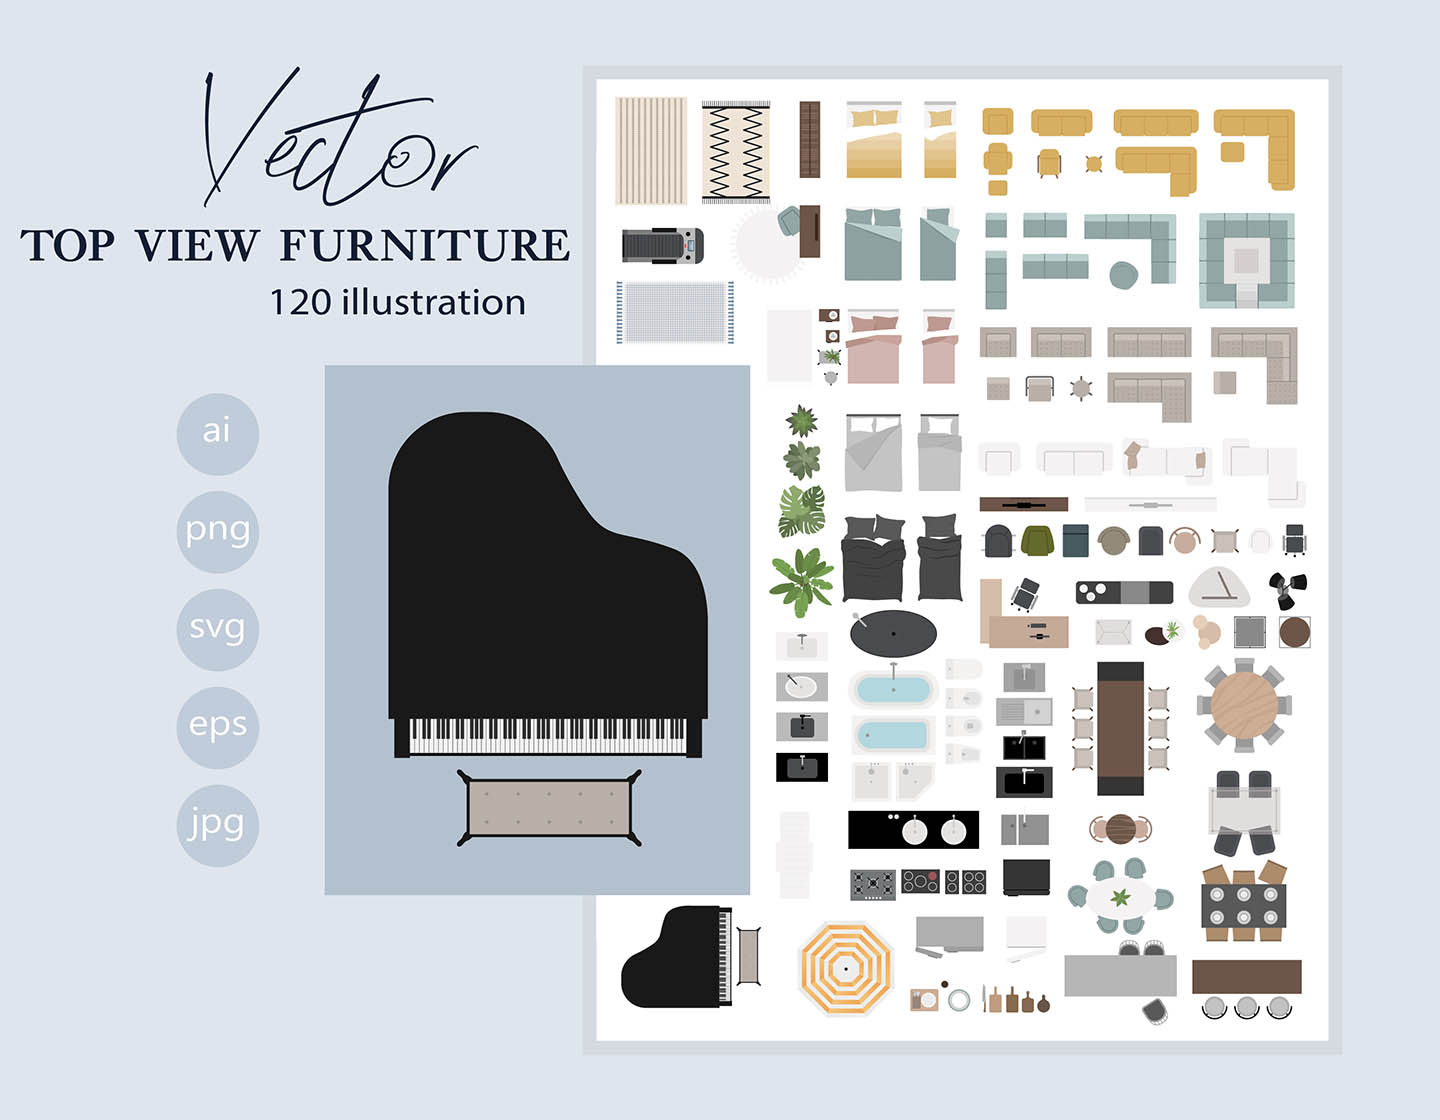 Top View Furniture - Vector Illustration